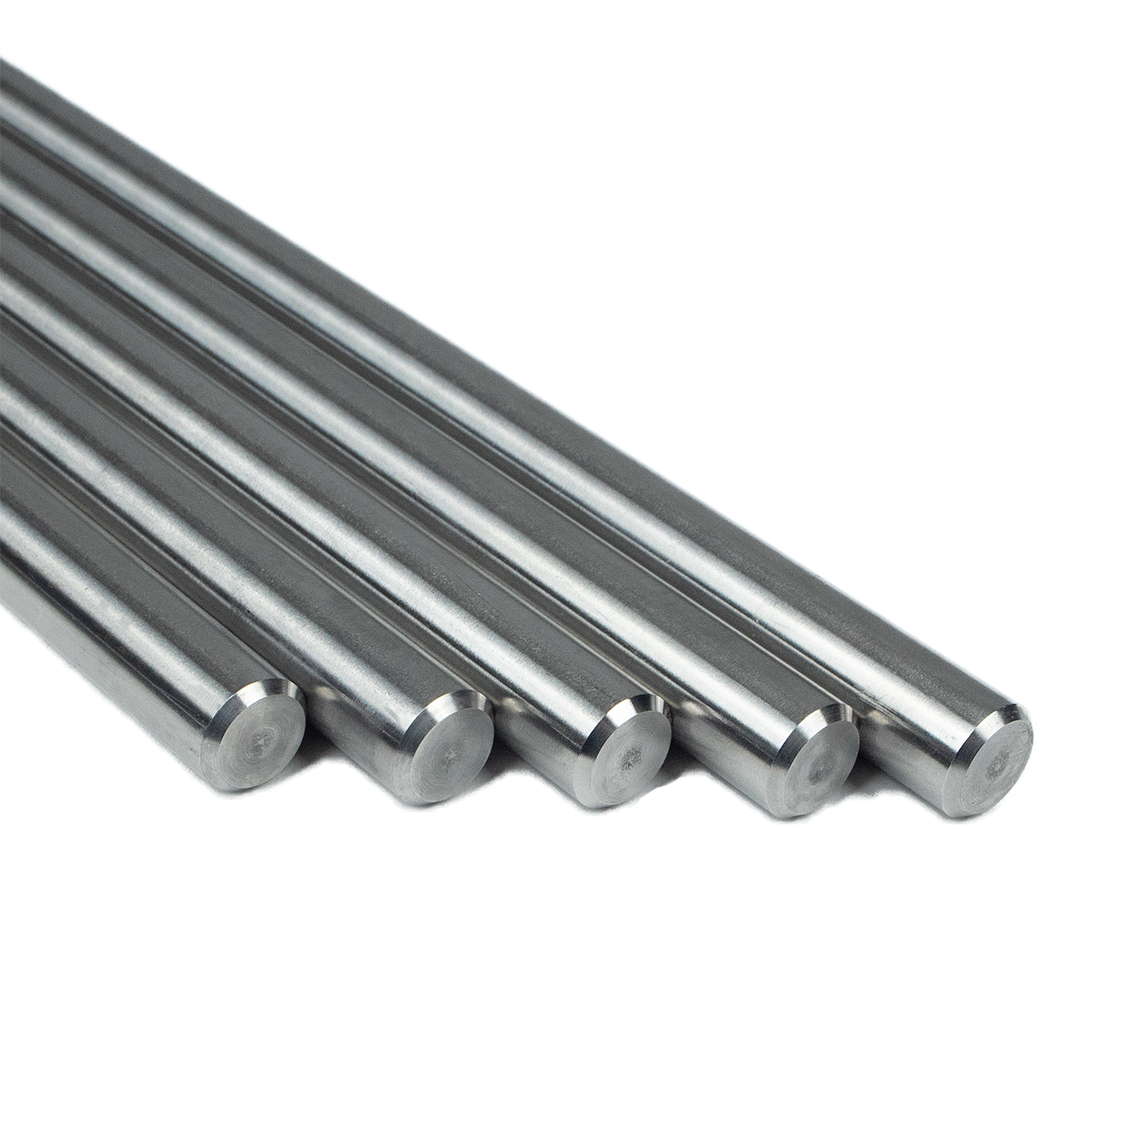 Stand Rod - Ø 10 mm, length 600 mm - stainless steel